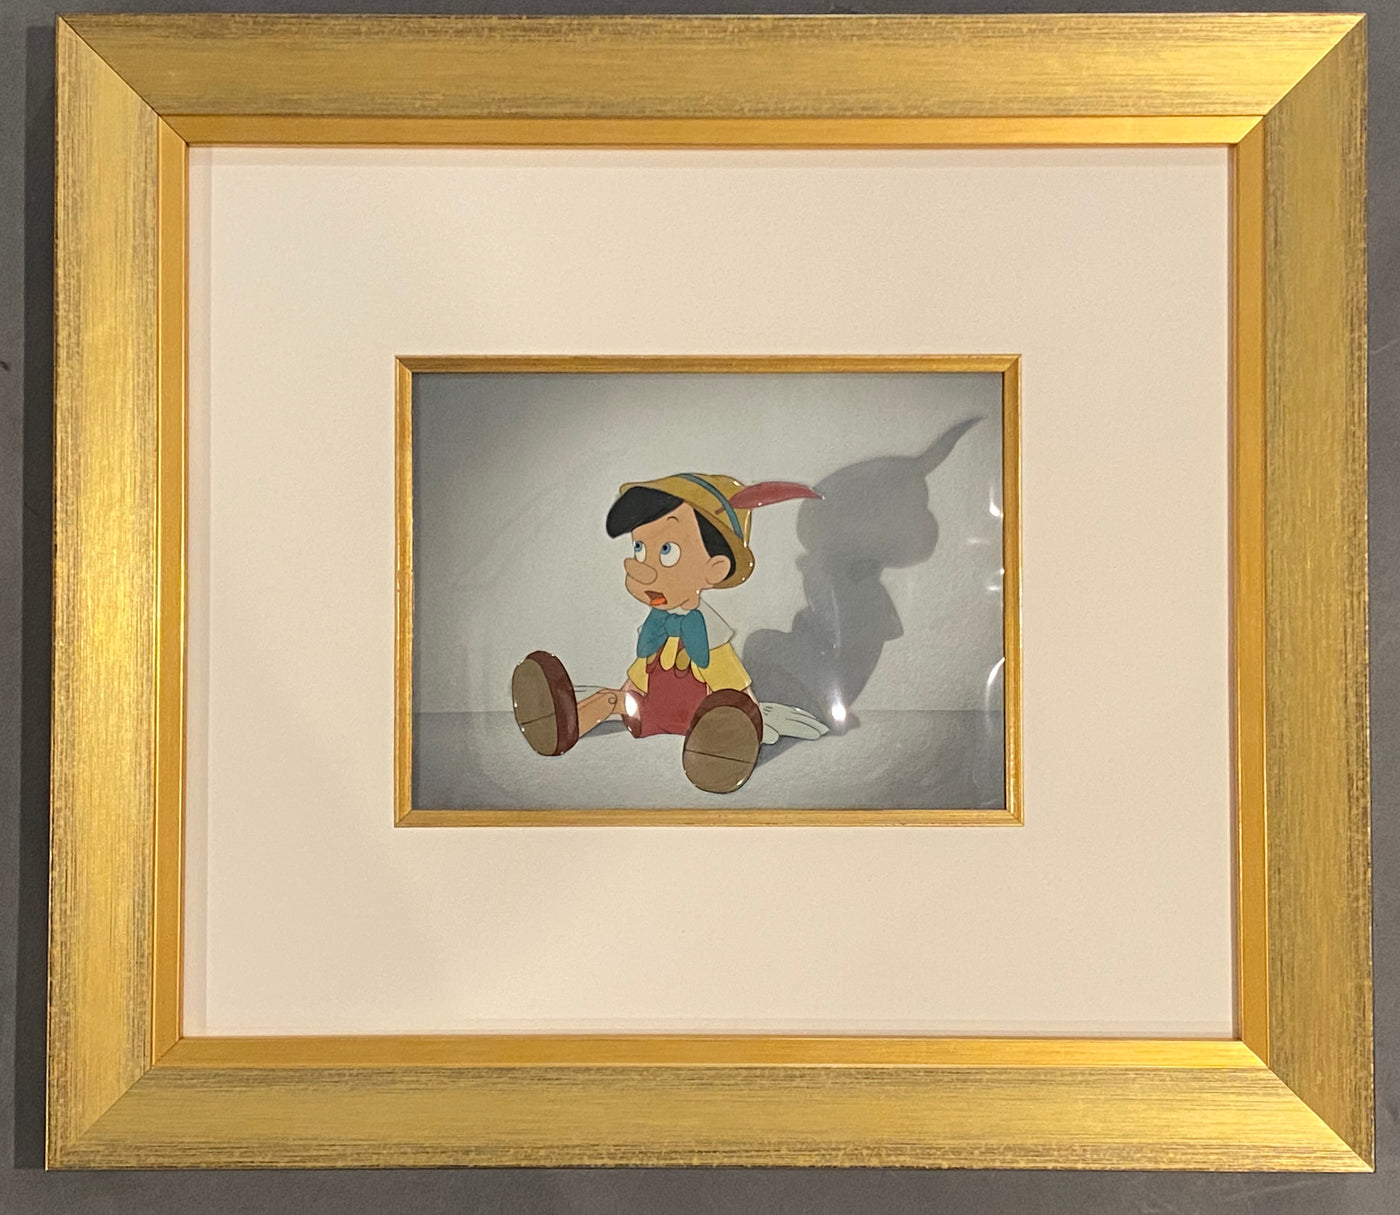 Original Walt Disney Production Cel of Pinocchio on a Courvoisier Background from Pinocchio (1940)